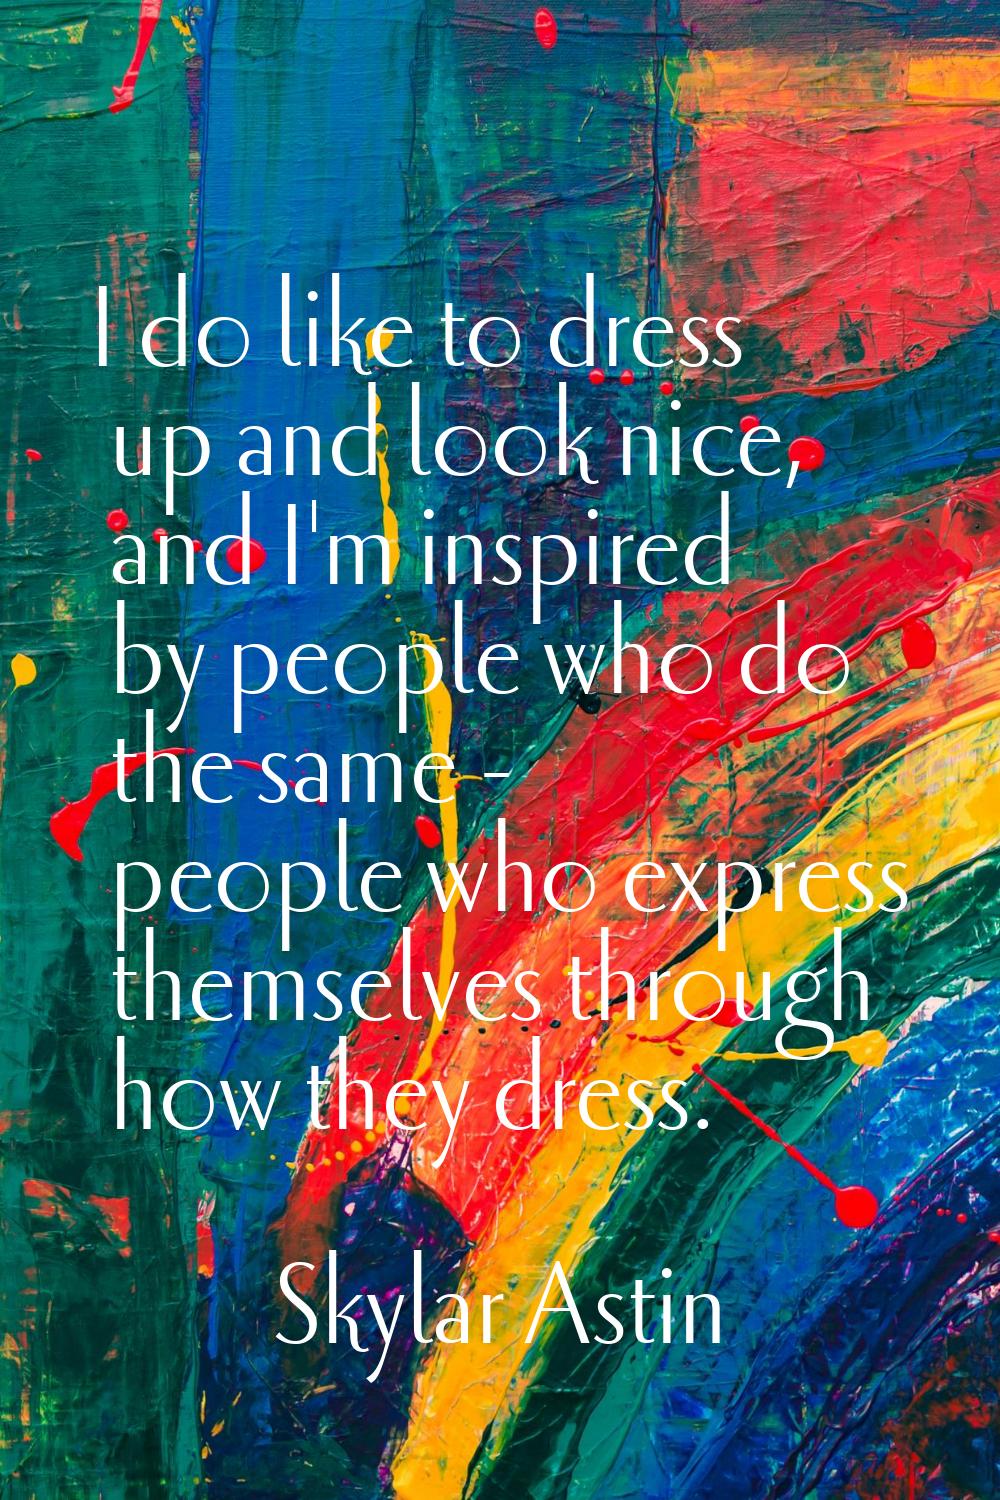 I do like to dress up and look nice, and I'm inspired by people who do the same - people who expres